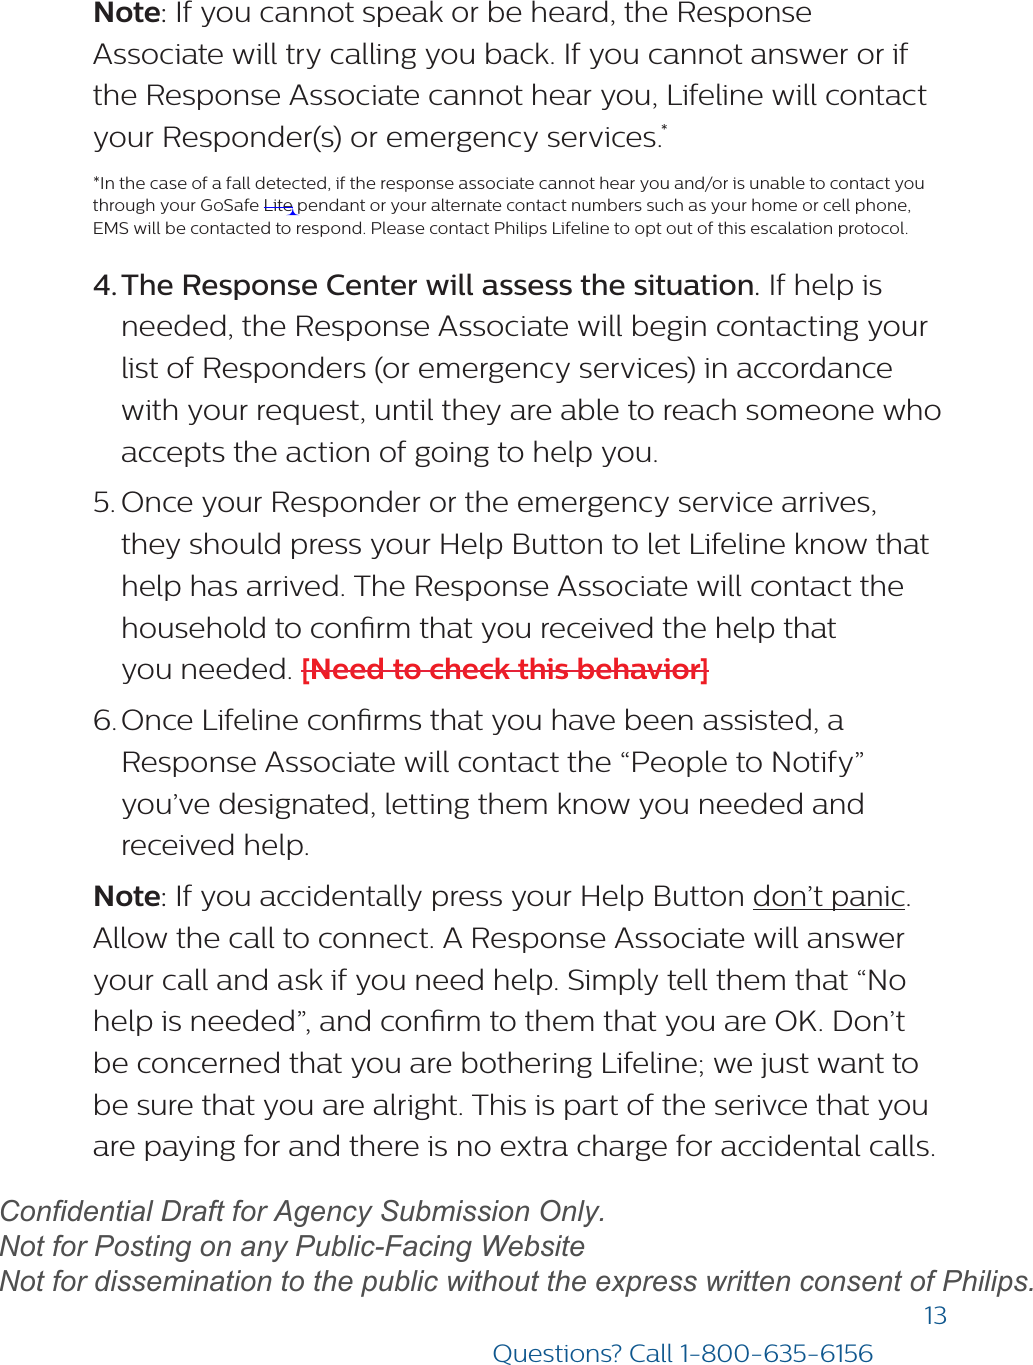 13Questions? Call 1-800-635-6156Note: If you cannot speak or be heard, the Response Associate will try calling you back. If you cannot answer or if the Response Associate cannot hear you, Lifeline will contact your Responder(s) or emergency services.**In the case of a fall detected, if the response associate cannot hear you and/or is unable to contact youthrough your GoSafe Lite pendant or your alternate contact numbers such as your home or cell phone,EMS will be contacted to respond. Please contact Philips Lifeline to opt out of this escalation protocol.4. The Response Center will assess the situation. If help isneeded, the Response Associate will begin contacting yourlist of Responders (or emergency services) in accordancewith your request, until they are able to reach someone whoaccepts the action of going to help you.5. Once your Responder or the emergency service arrives,they should press your Help Button to let Lifeline know thathelp has arrived. The Response Associate will contact thehousehold to conrm that you received the help thatyou needed. [Need to check this behavior]6. Once Lifeline conrms that you have been assisted, aResponse Associate will contact the “People to Notify”you’ve designated, letting them know you needed andreceived help.Note: If you accidentally press your Help Button don’t panic. Allow the call to connect. A Response Associate will answer your call and ask if you need help. Simply tell them that “No help is needed”, and conrm to them that you are OK. Don’t be concerned that you are bothering Lifeline; we just want to be sure that you are alright. This is part of the serivce that you are paying for and there is no extra charge for accidental calls. draftConfidential Draft for Agency Submission Only.   Not for Posting on any Public-Facing Website Not for dissemination to the public without the express written consent of Philips.